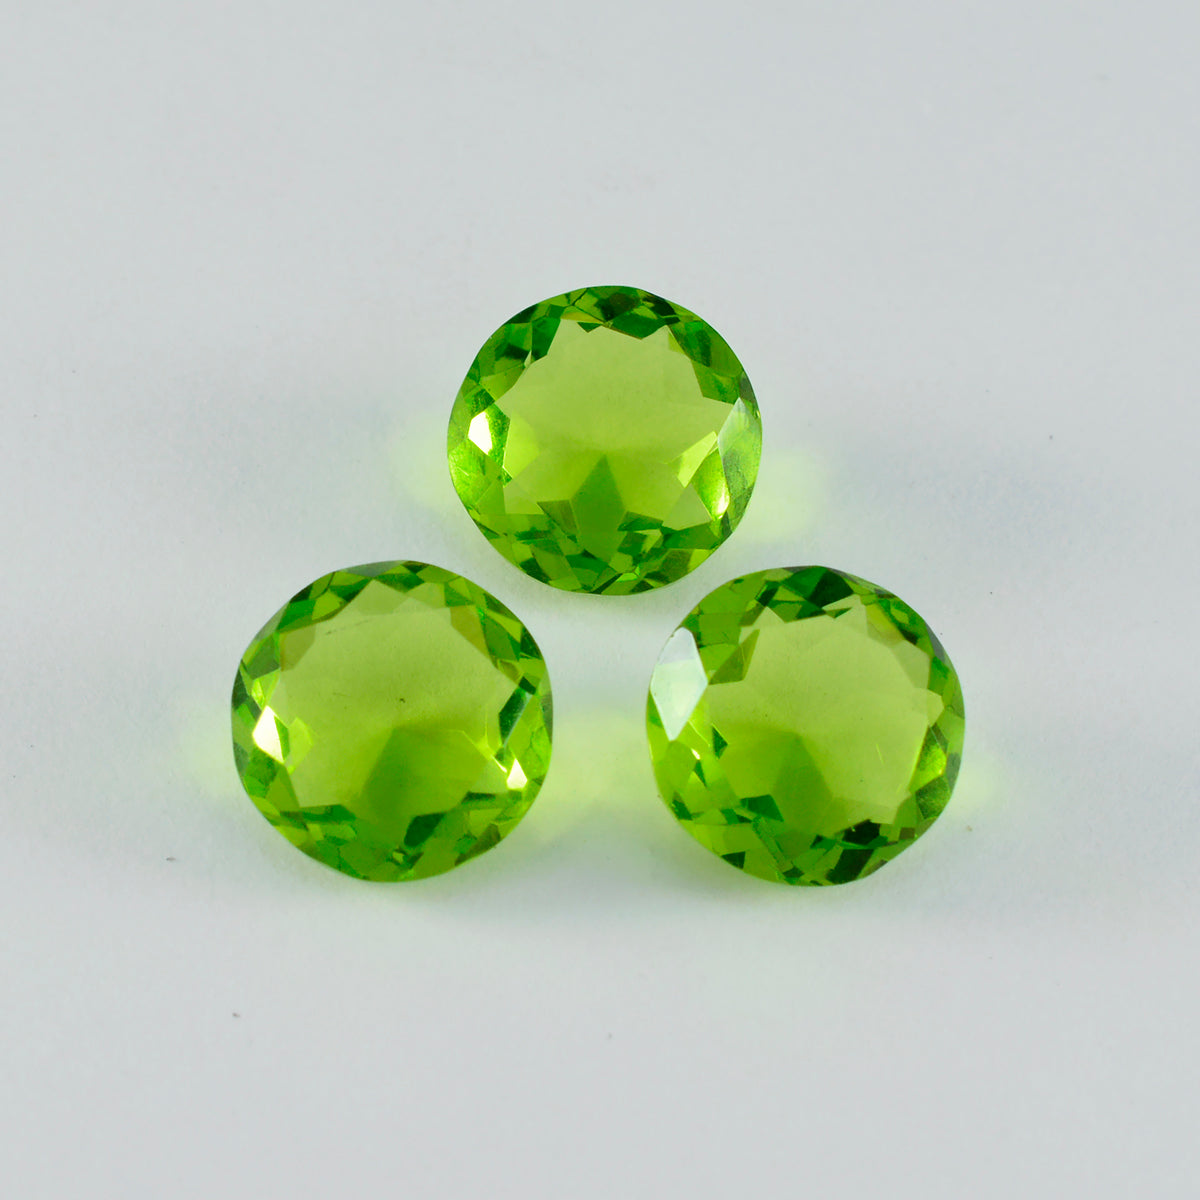 Riyogems 1PC Green Peridot CZ Faceted 15x15 mm Round Shape handsome Quality Stone